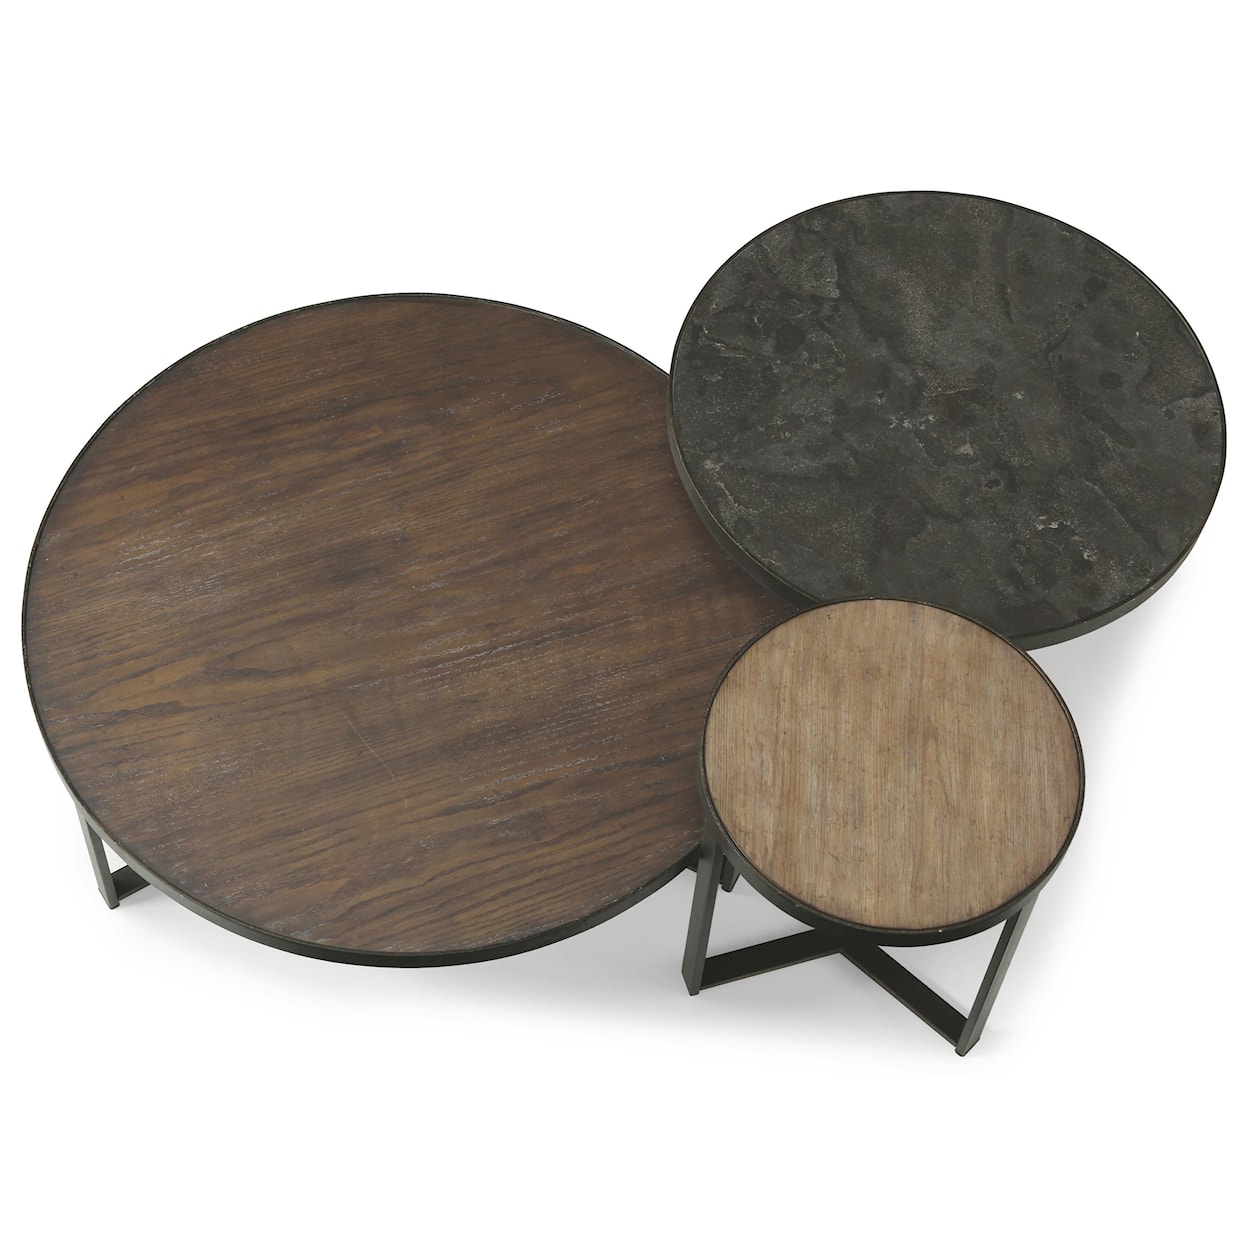 Flexsteel Wynwood Collection Carmen Large Round Bunching Cocktail Table